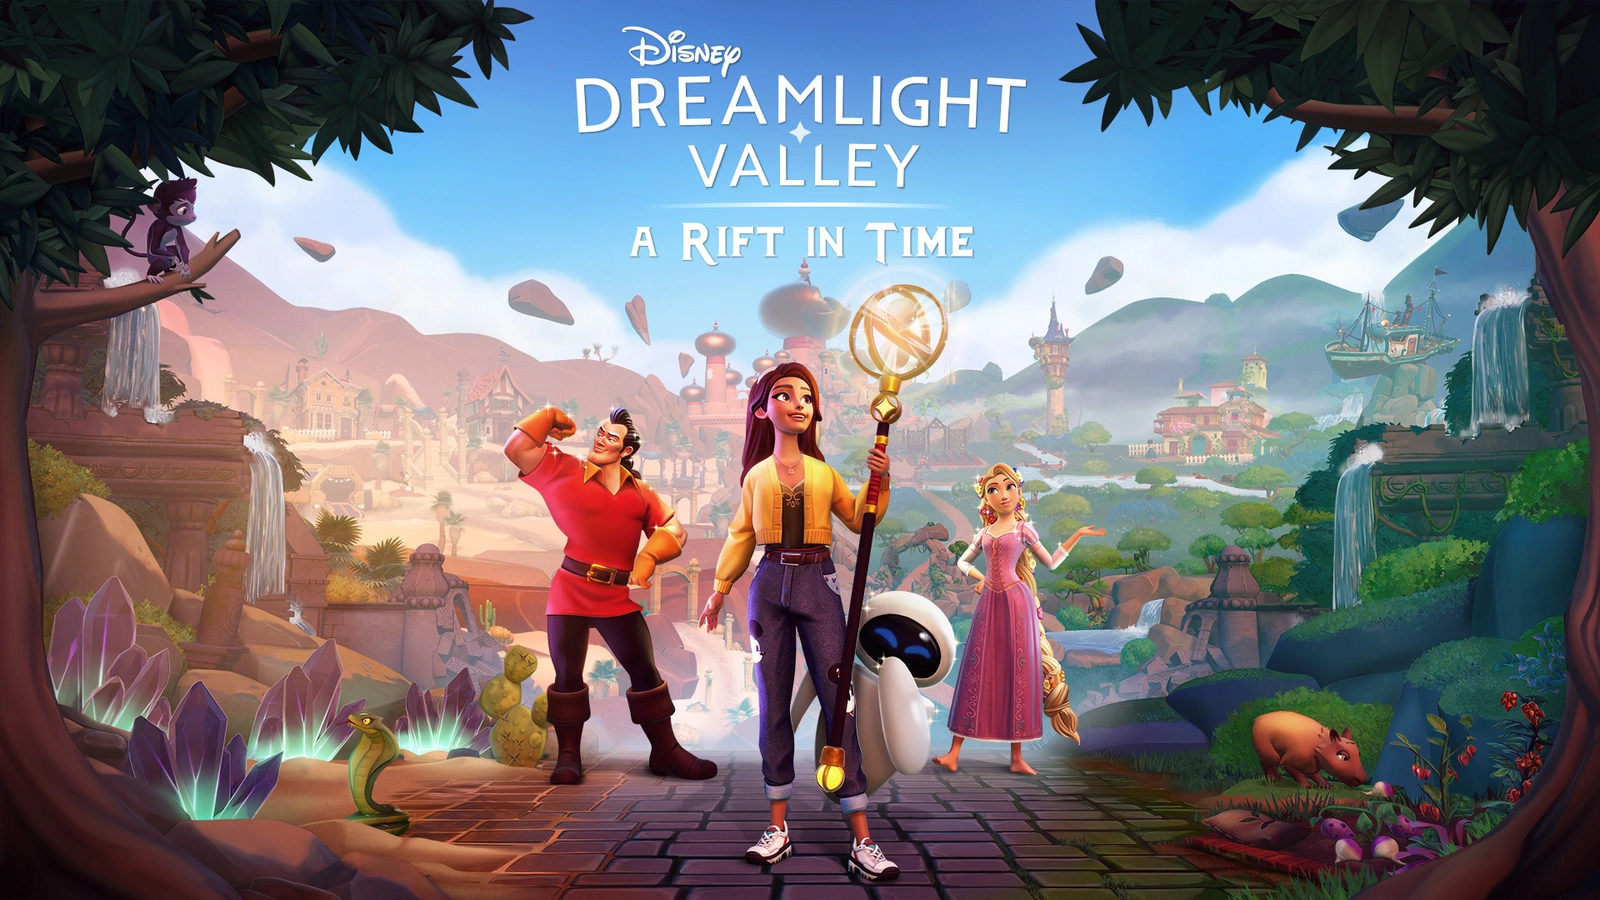 Disney Dreamlight Valley has no plans of returning the lost Dreamlights of players